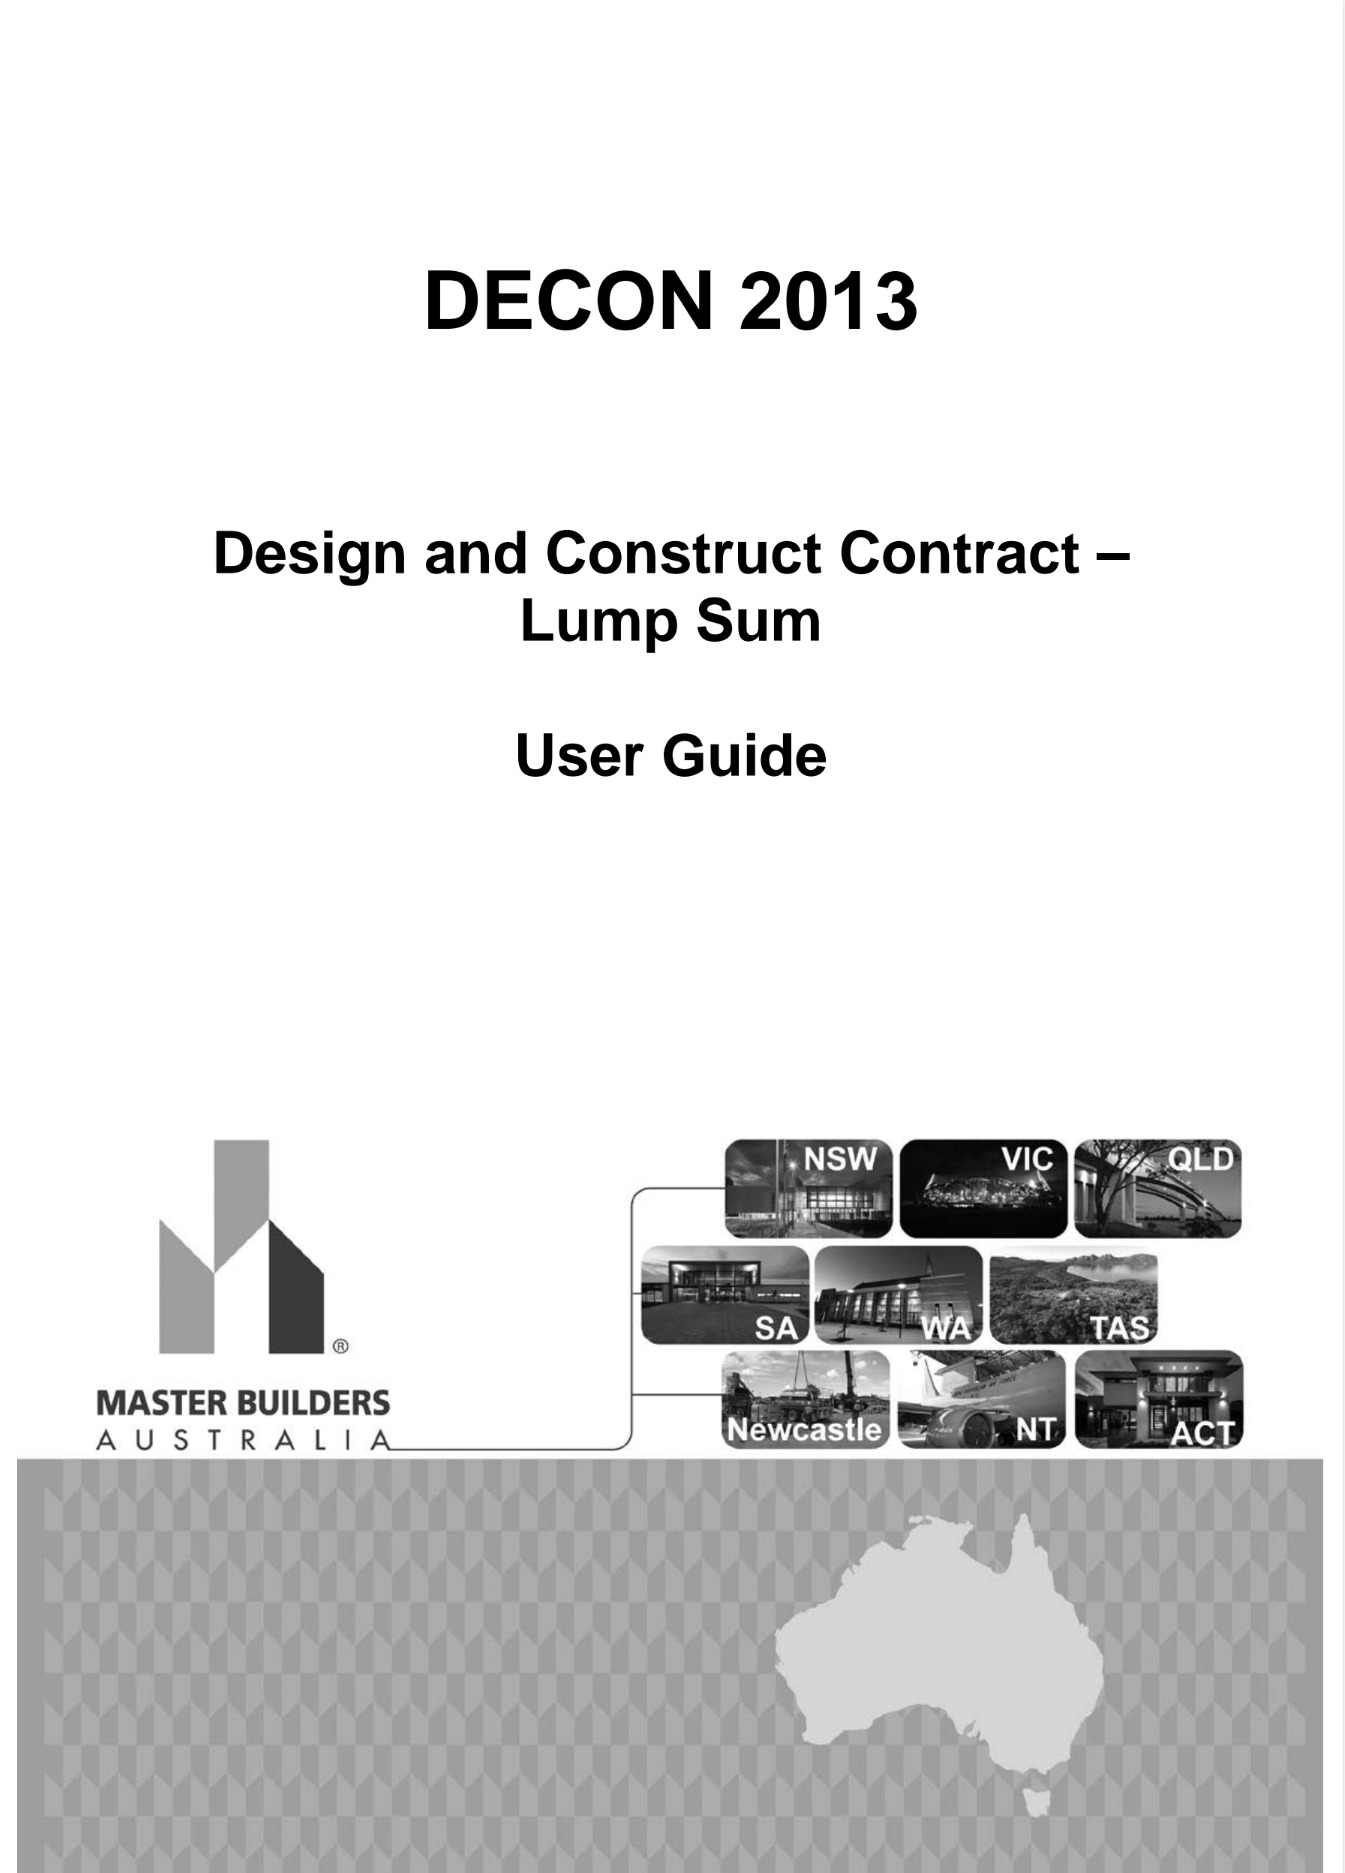 Design and Construction Lump Sum User Guide 2013